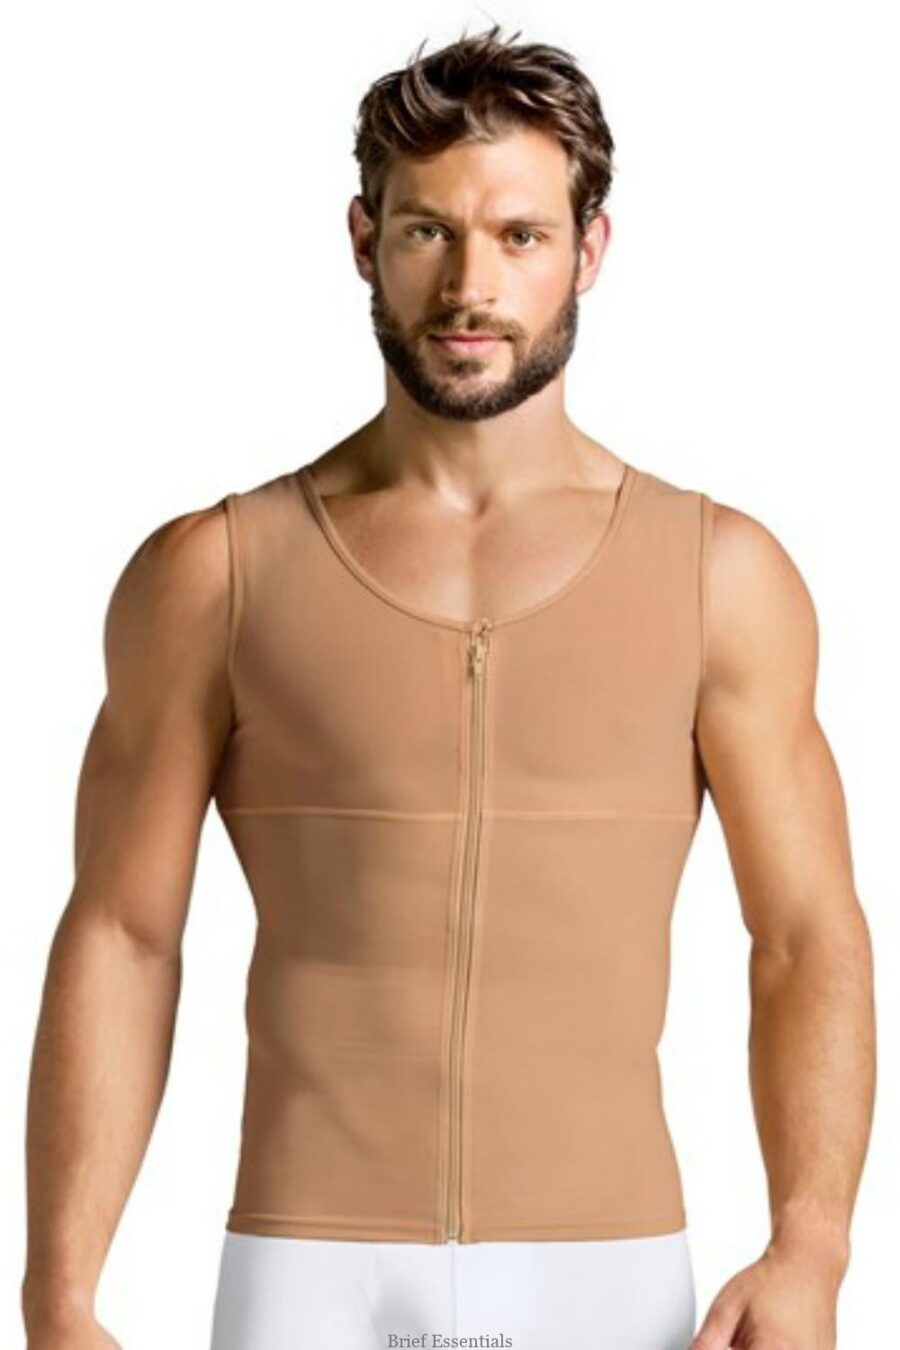 Mens ABS Slimming BodyShaper with Back Support